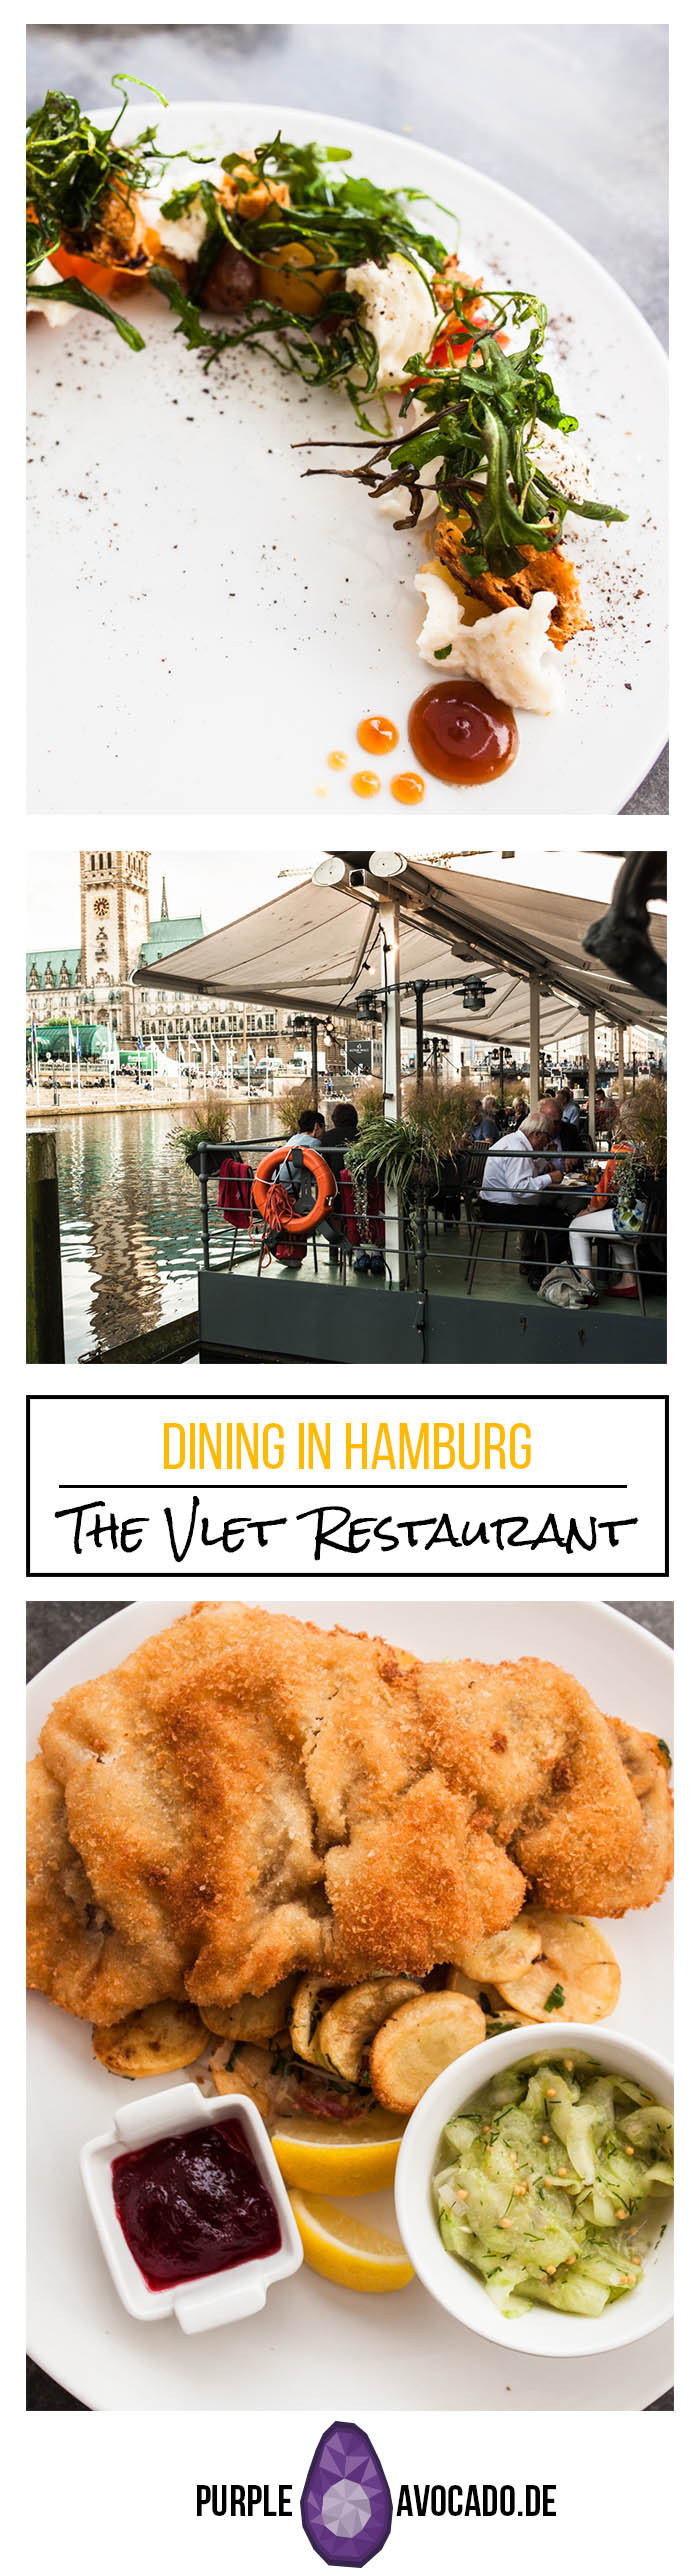 Restaurant Guide Hamburg - In Hamburg there are many, many places with good food. If you want to savour authentic Hamburg cuisine I'm sending you directly to the Vlet at the Alster. #restaurant #europe #germany #food #city #guide #hamburg